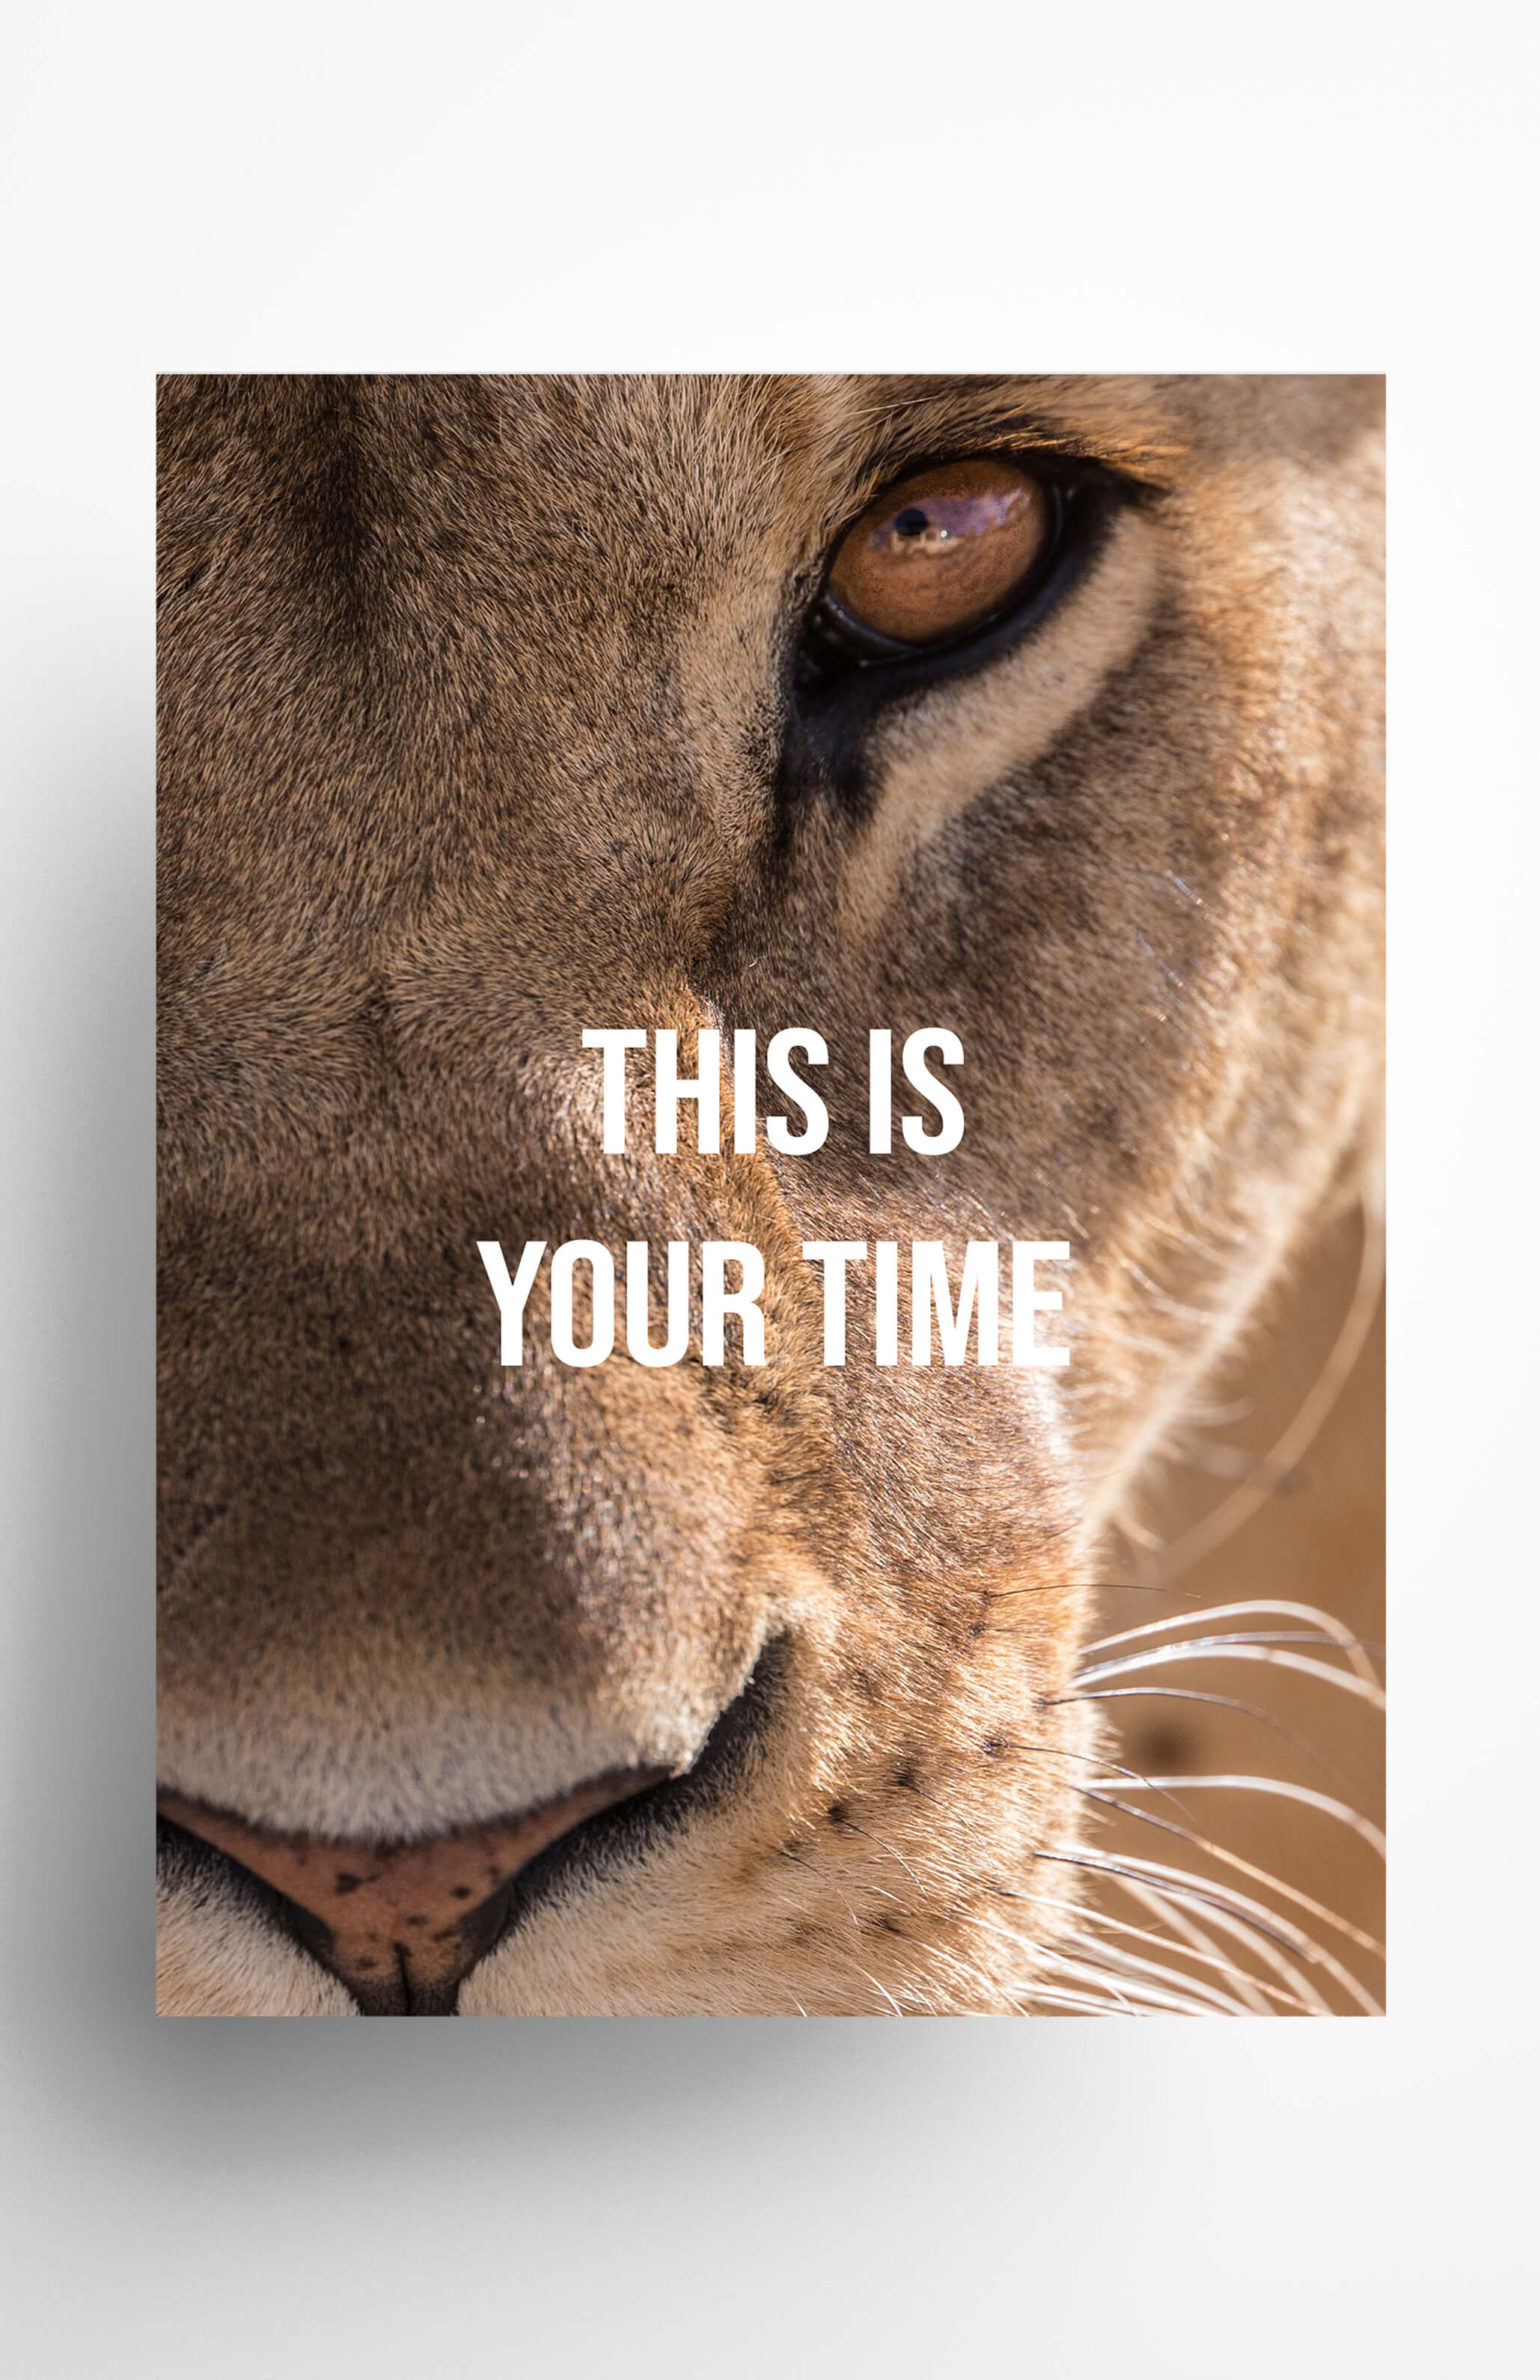 V3 Apparel womens This is Your Time, Motivational posters, mens inspirational wall artwork and empowering poster quote designs for office, home gym, school, kitchen and living room.